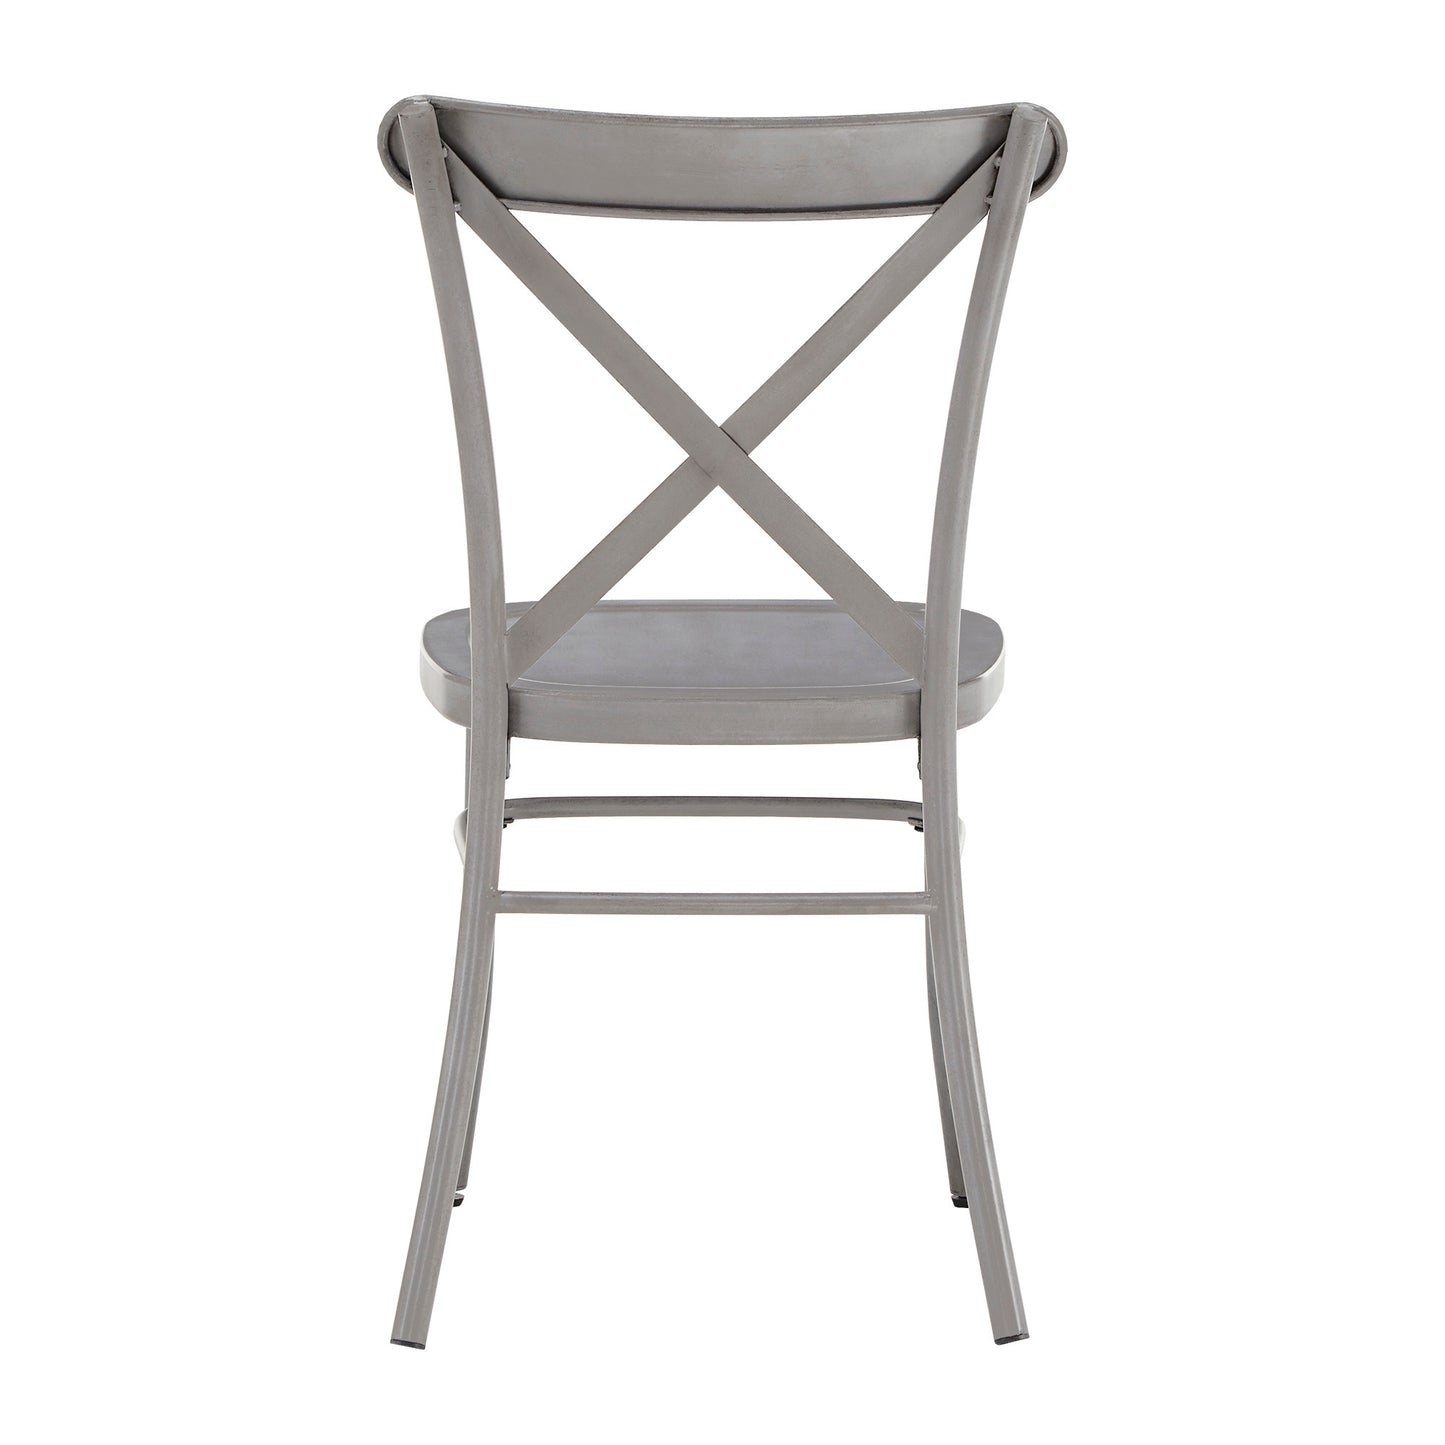 Metal Dining Chairs (Set of 2) - Antique Grey Finish